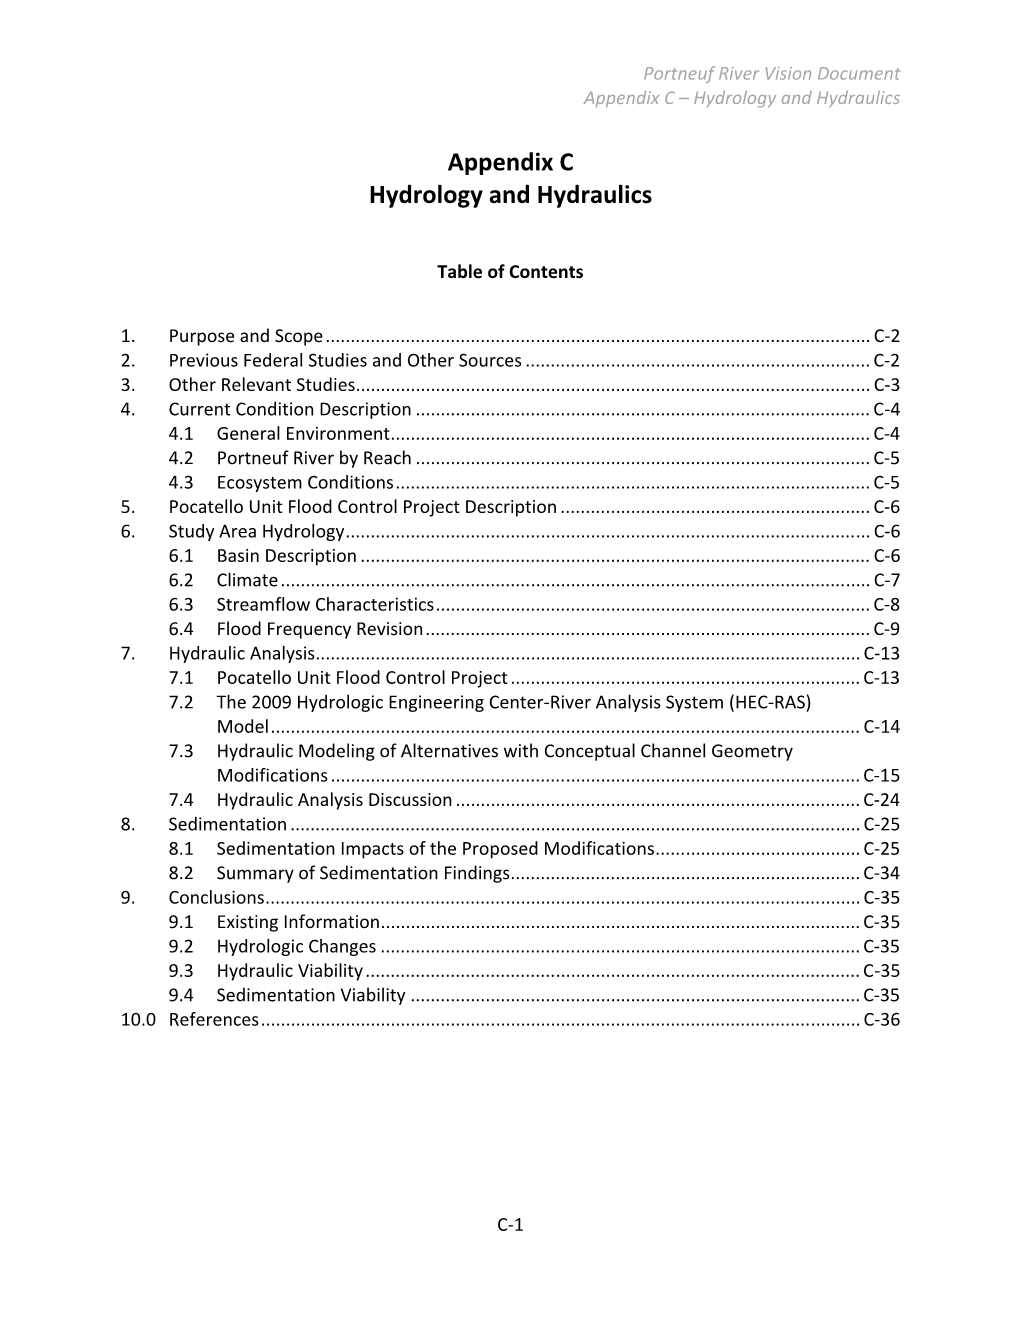 Appendix C Hydrology and Hydraulics